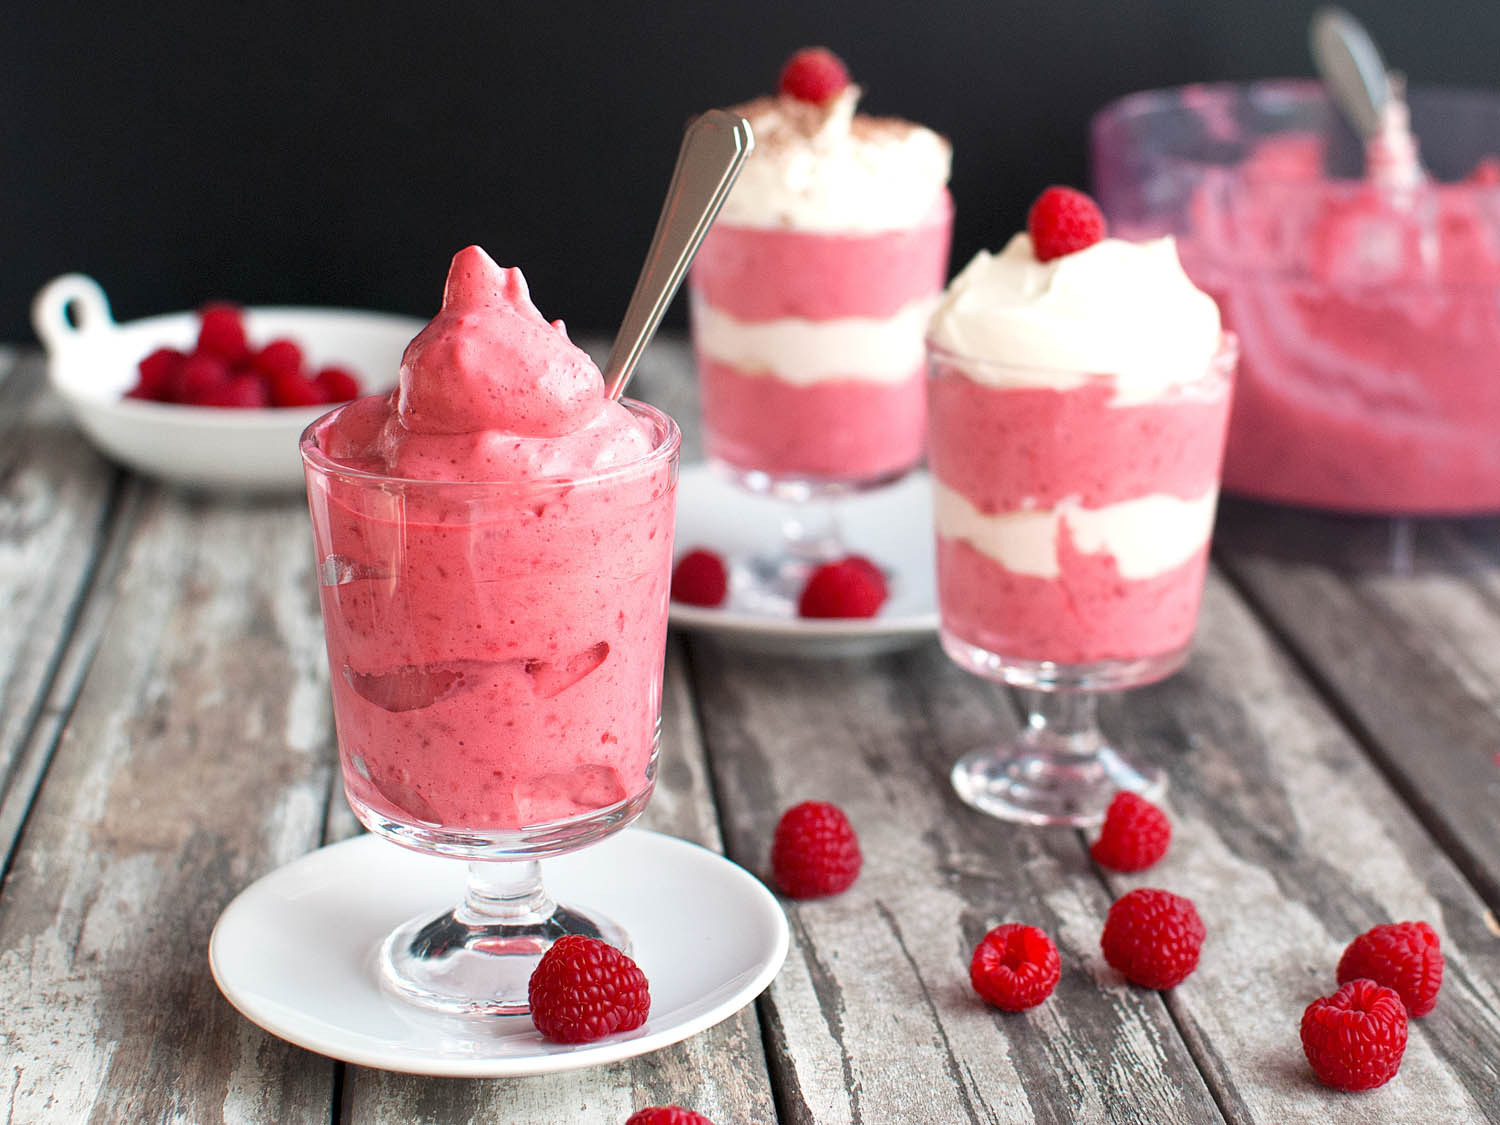 Healthy Desserts To Make
 Light and Easy 5 Minute Fruit Mousse Recipe